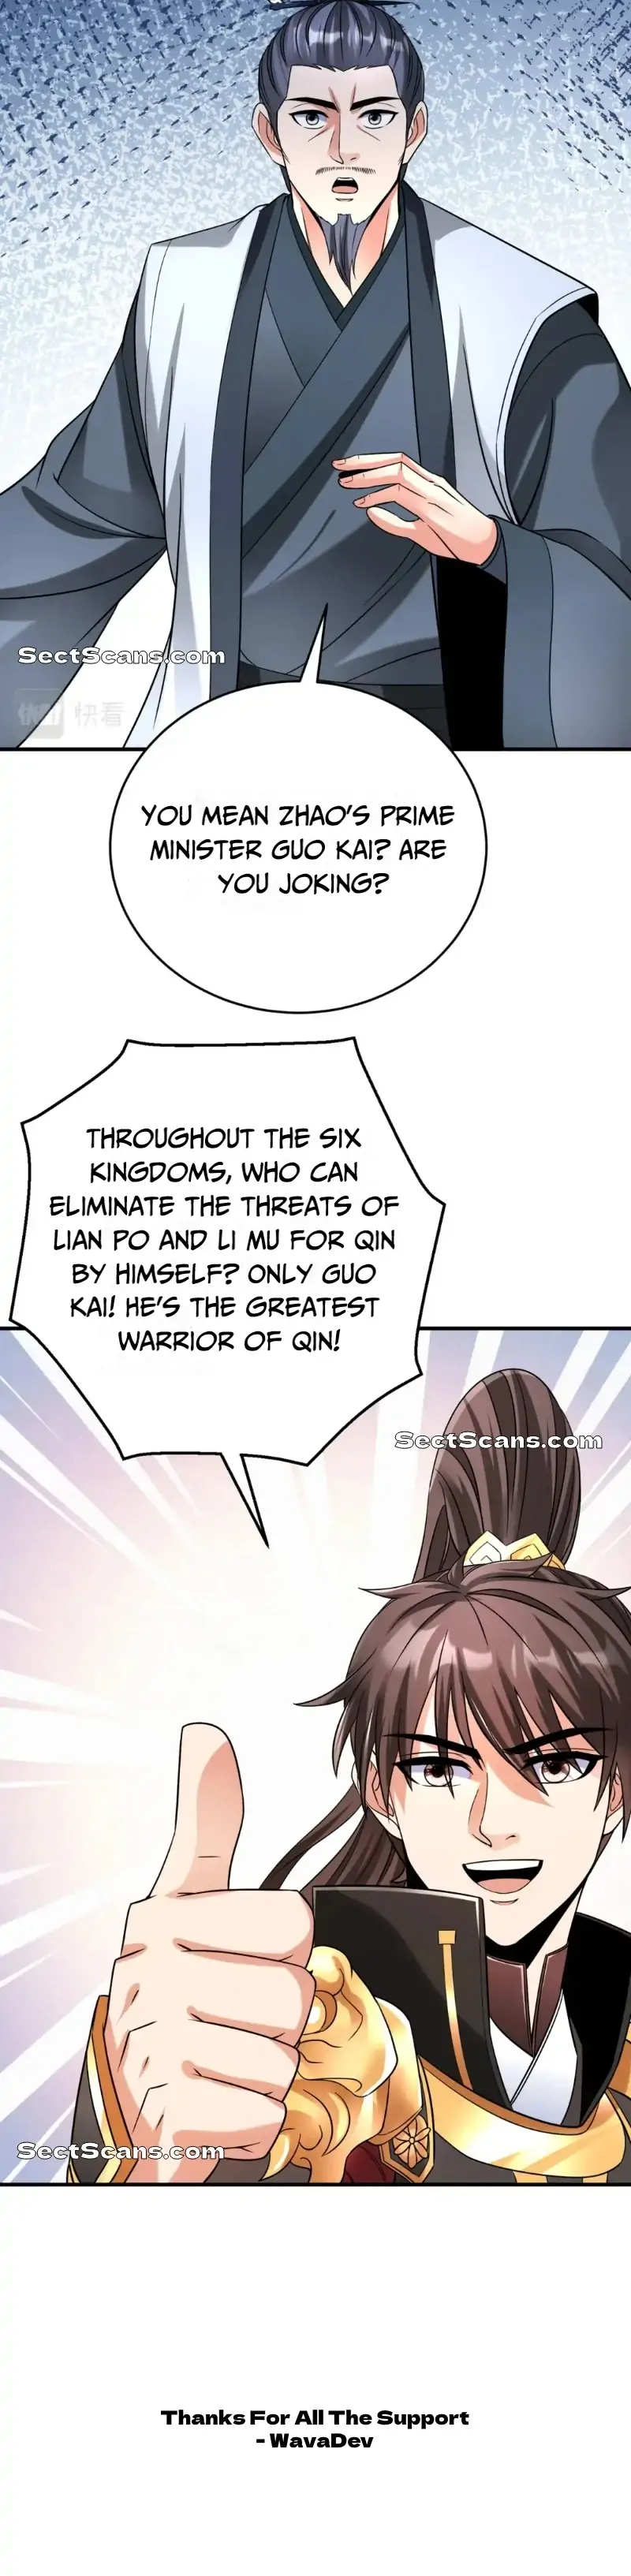 The Son Of The First Emperor Kills Enemies And Becomes A God Chapter 27 - Page 16